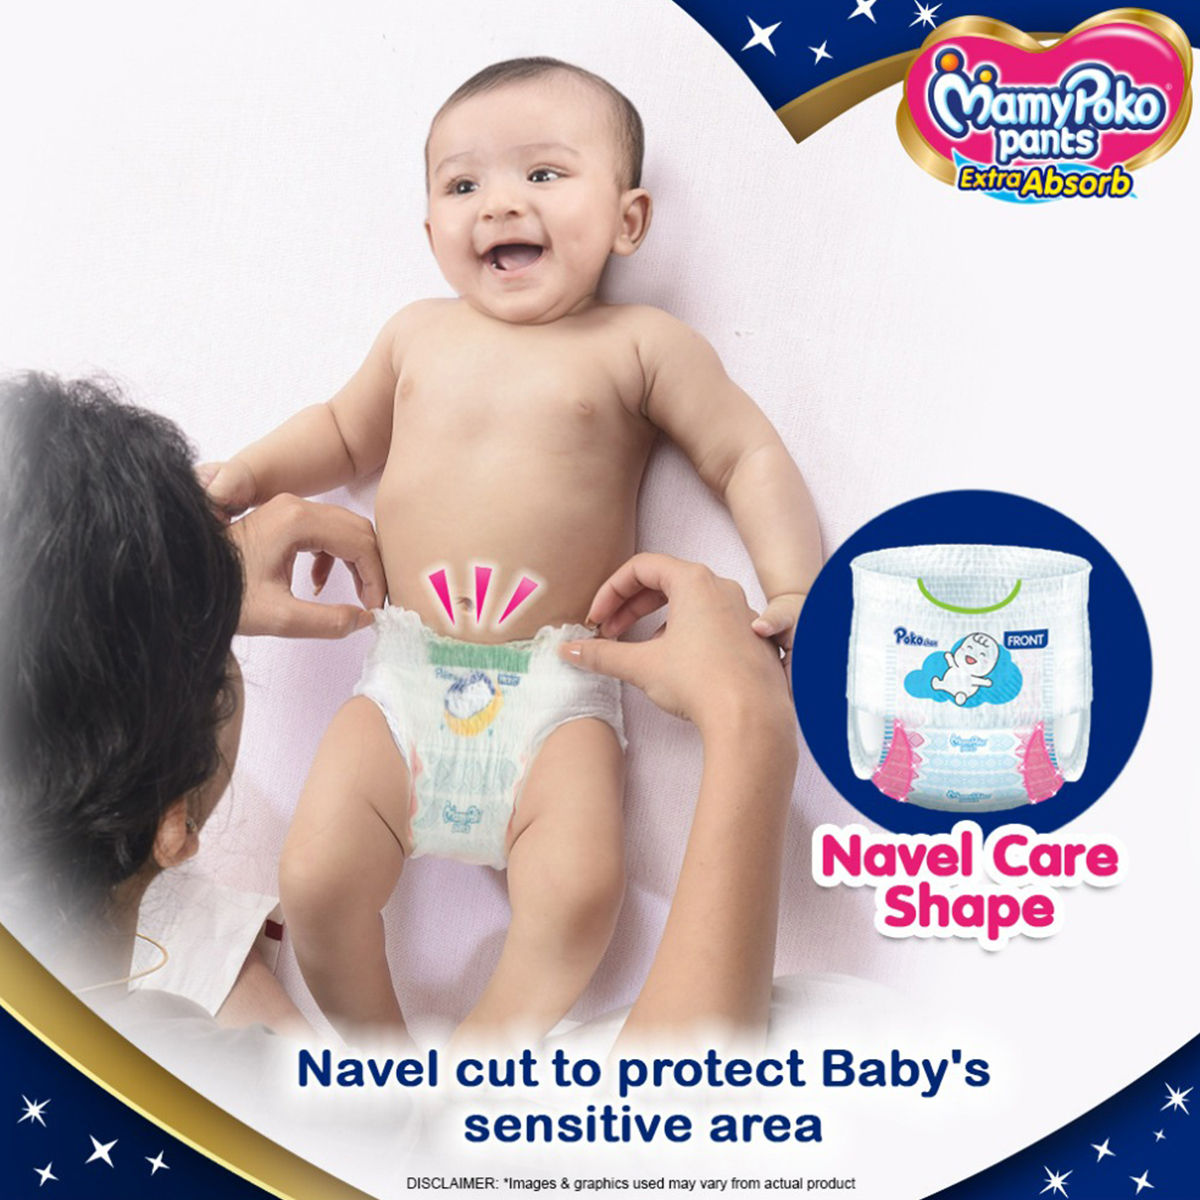 Buy MamyPoko Unisex Babies Pants Standard Style Small Diapers 4 kg  8  kg 22 count Online at Low Prices in India  Amazonin